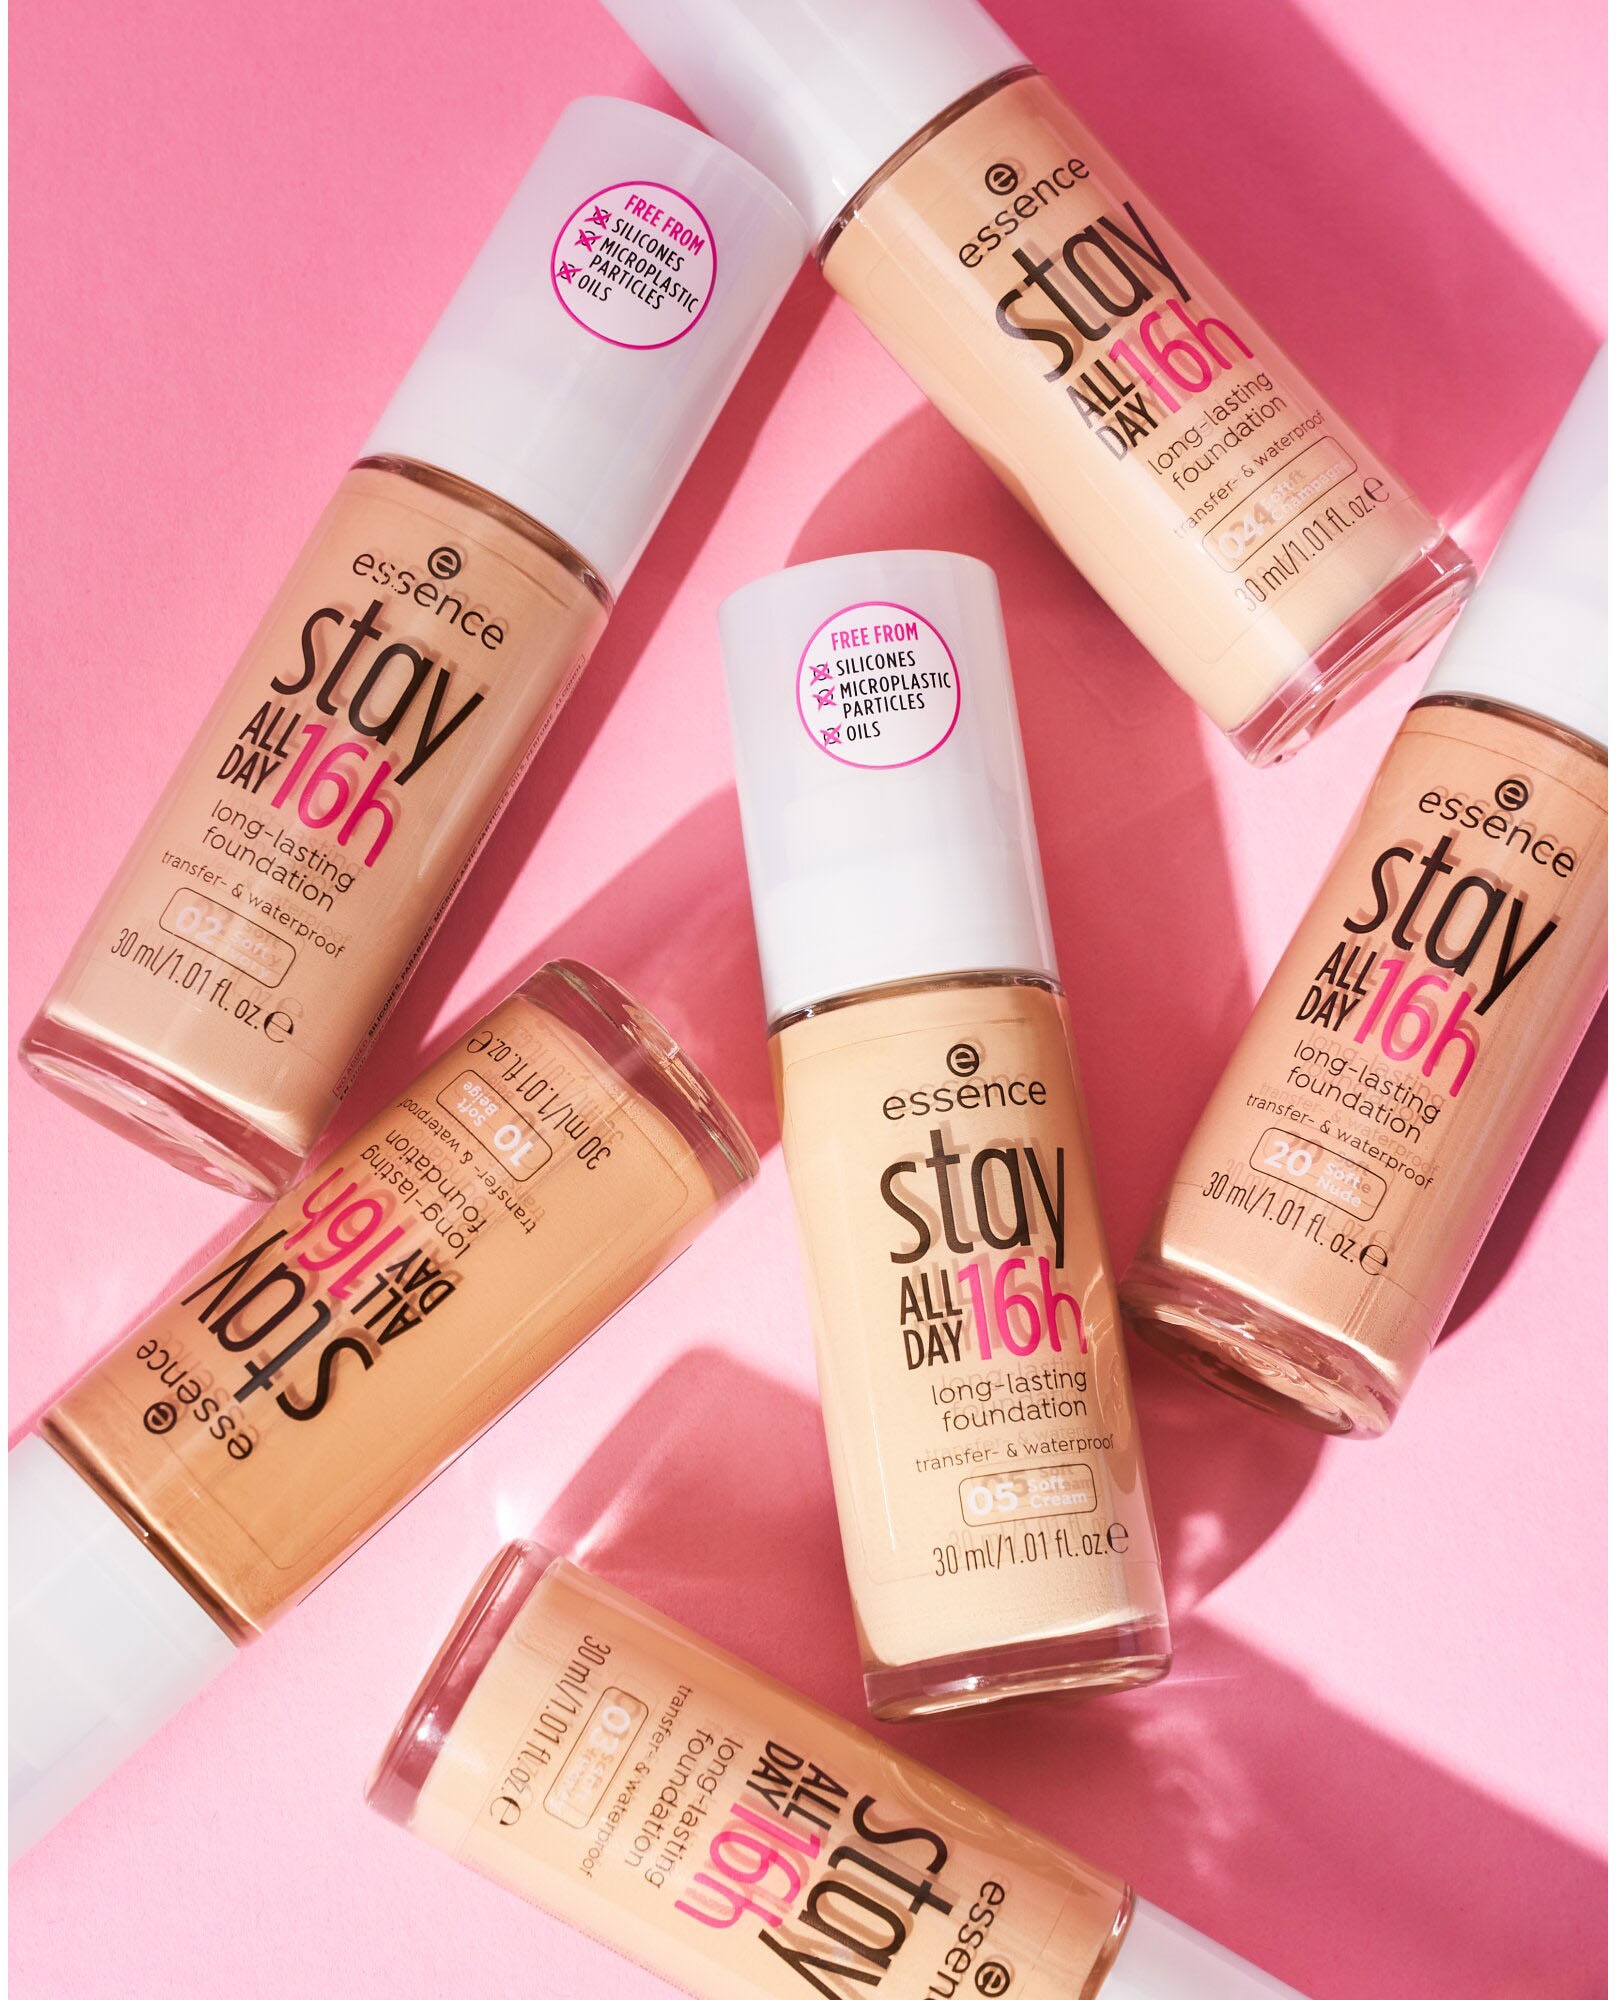 ALL bei ♕ tlg.) Essence 16h Foundation DAY 3 (Set, long-lasting«, »stay